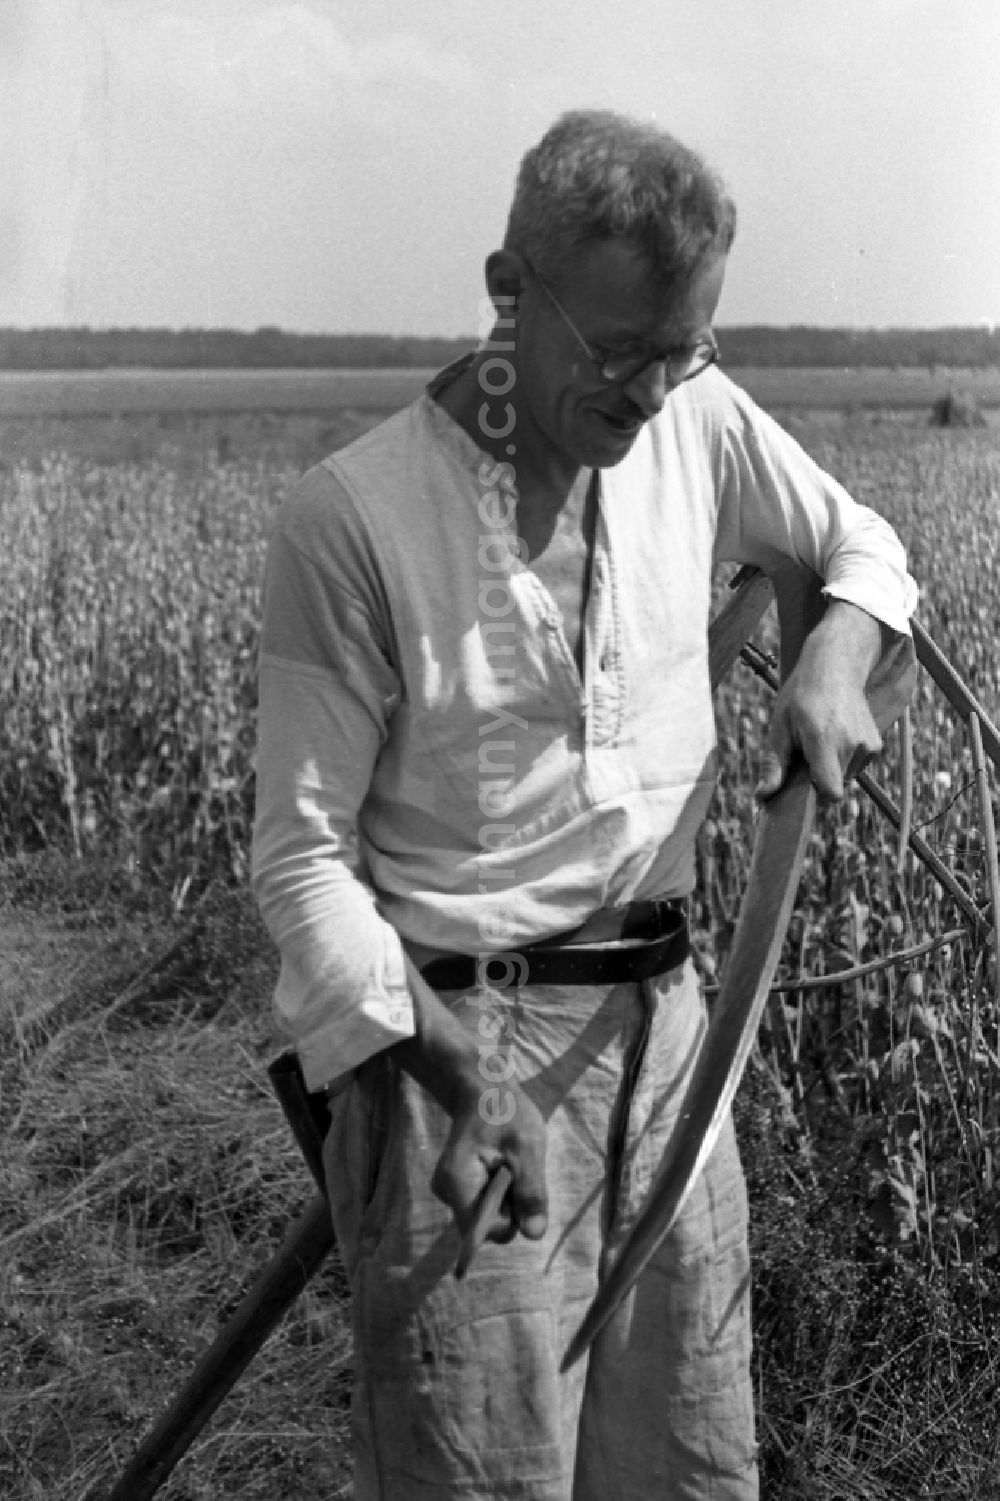 GDR photo archive: Trossin - A farmer with a scythe with the grain harvest on a field in Trossin in the federal state Saxony in Germany